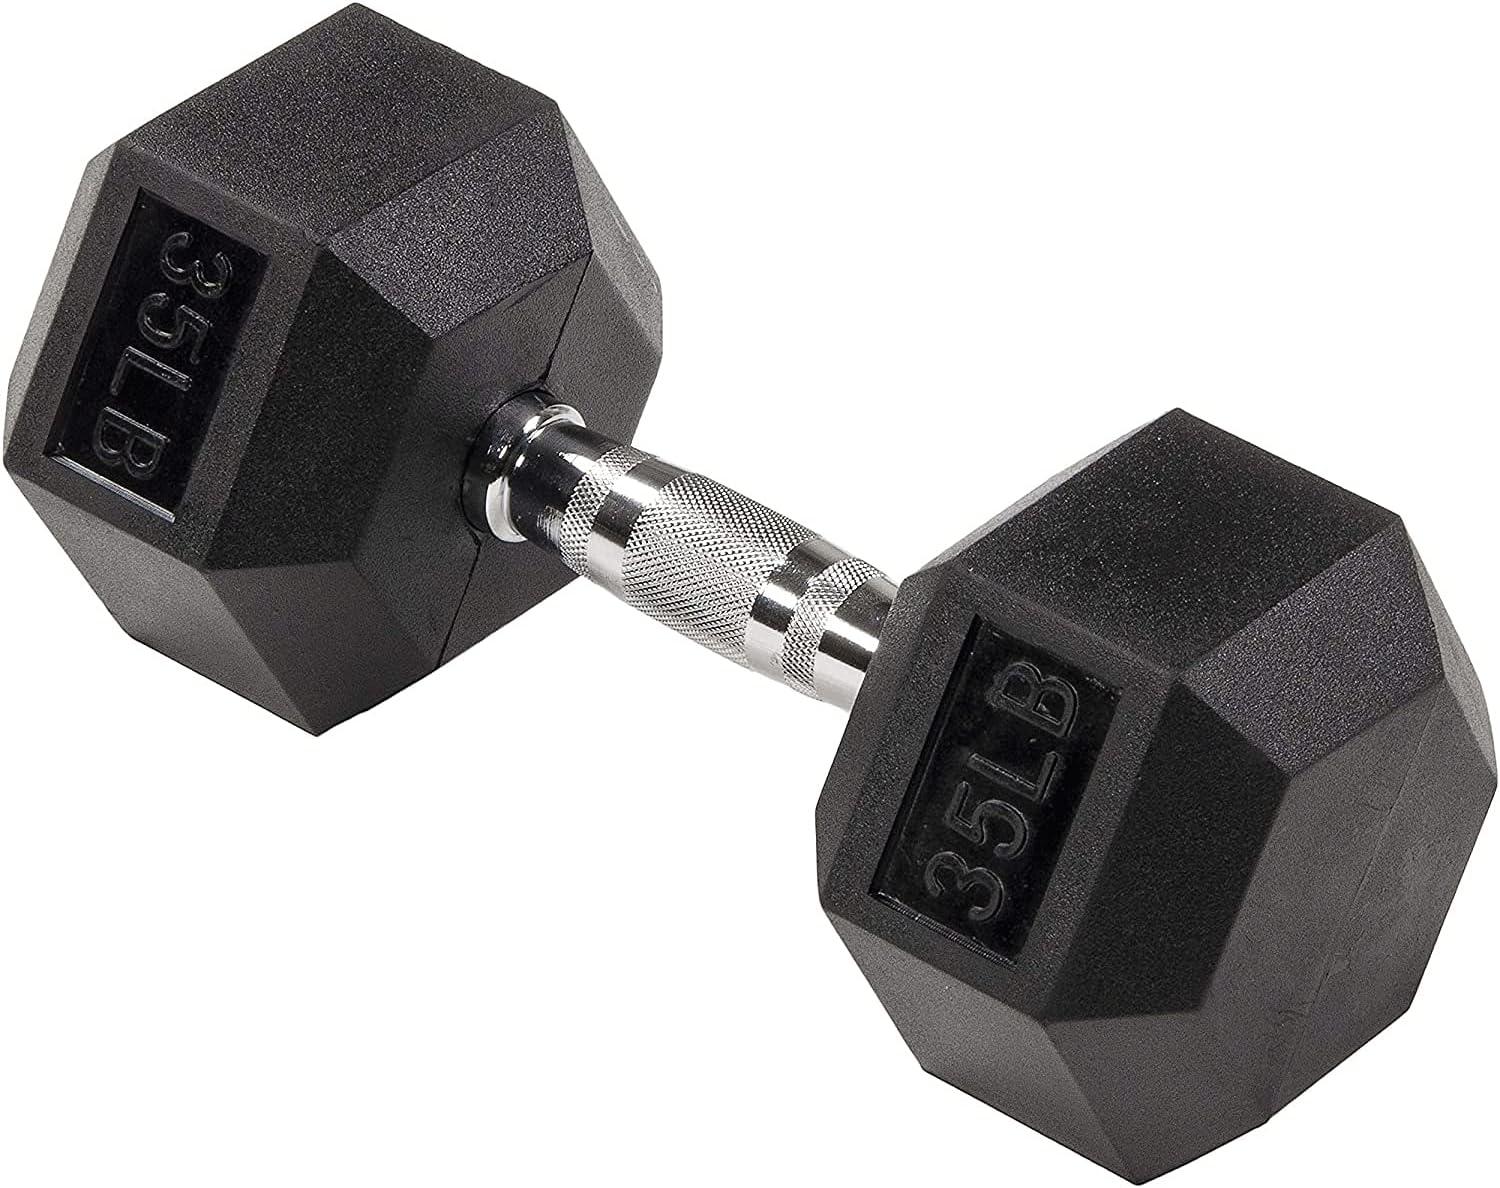 Signature Fitness 35lbs Rubber Encased Hex Dumbbell for $27.89